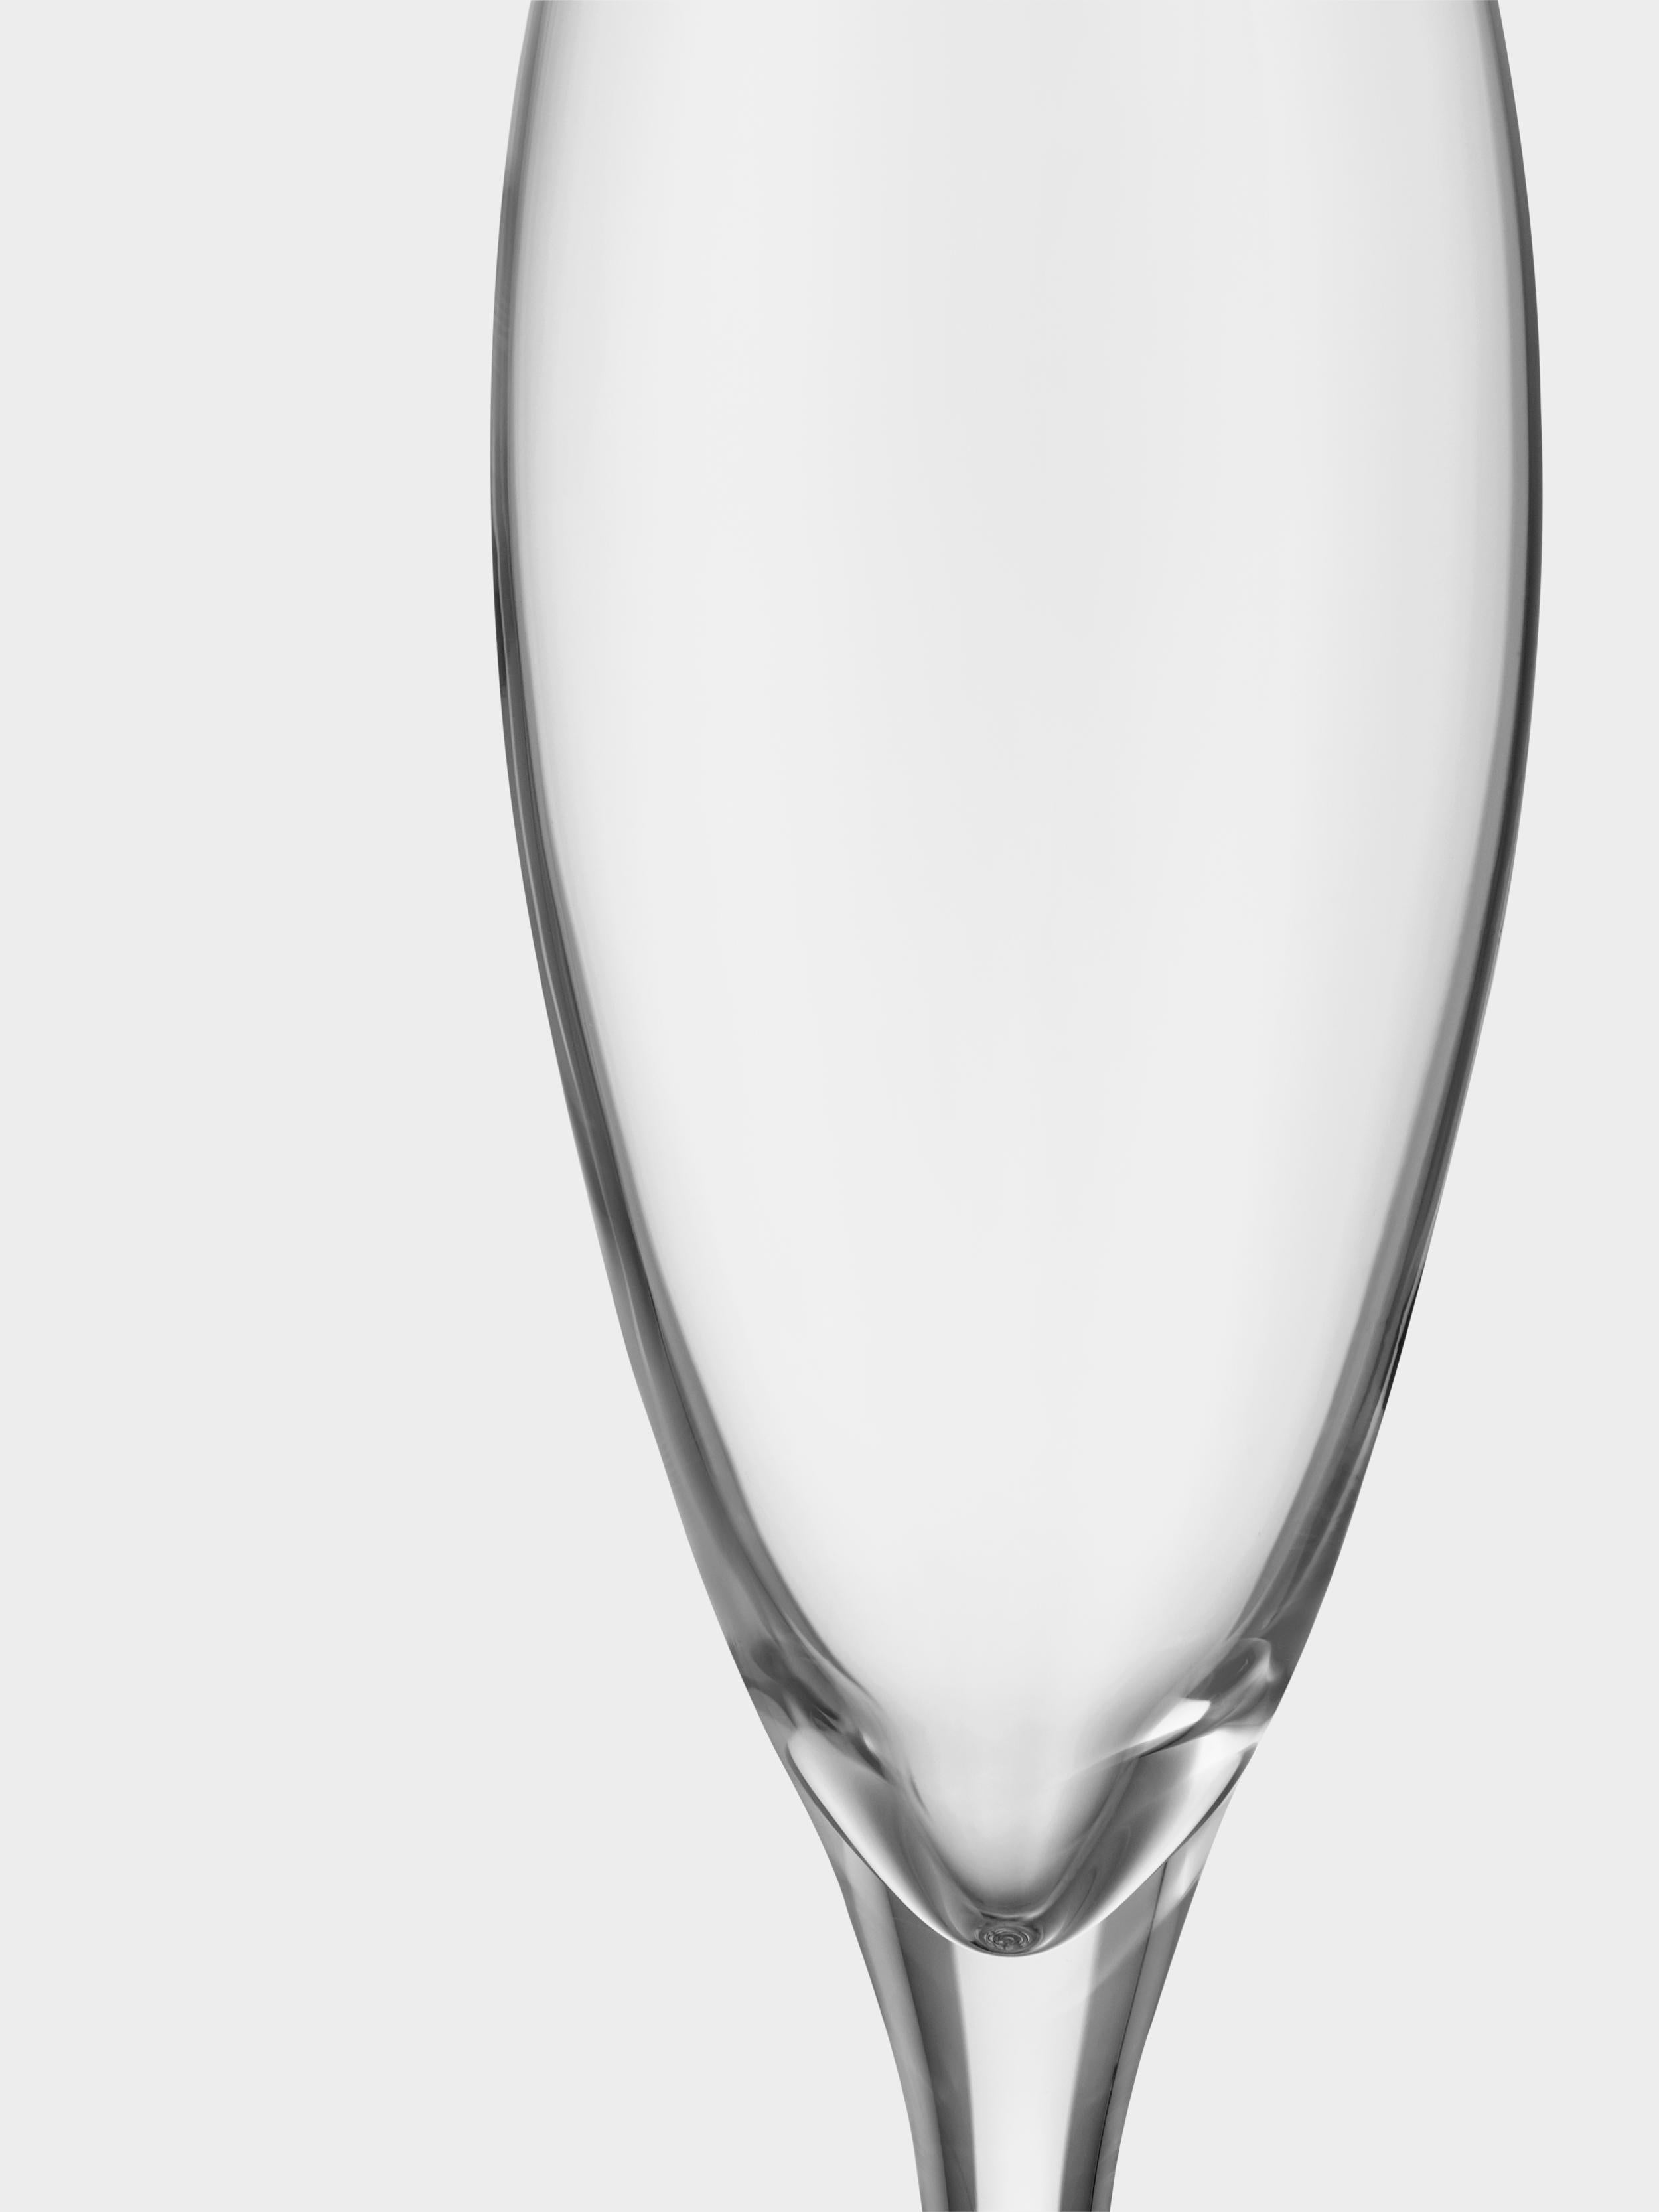 More Champagne from Orrefors, which holds 5 oz, is an elegant, festive glass for sparkling wines of all kinds. This glass accentuates the aromas and flavors of the drink, its crispness, and its fruitiness. The bubble point at the bottom of the glass